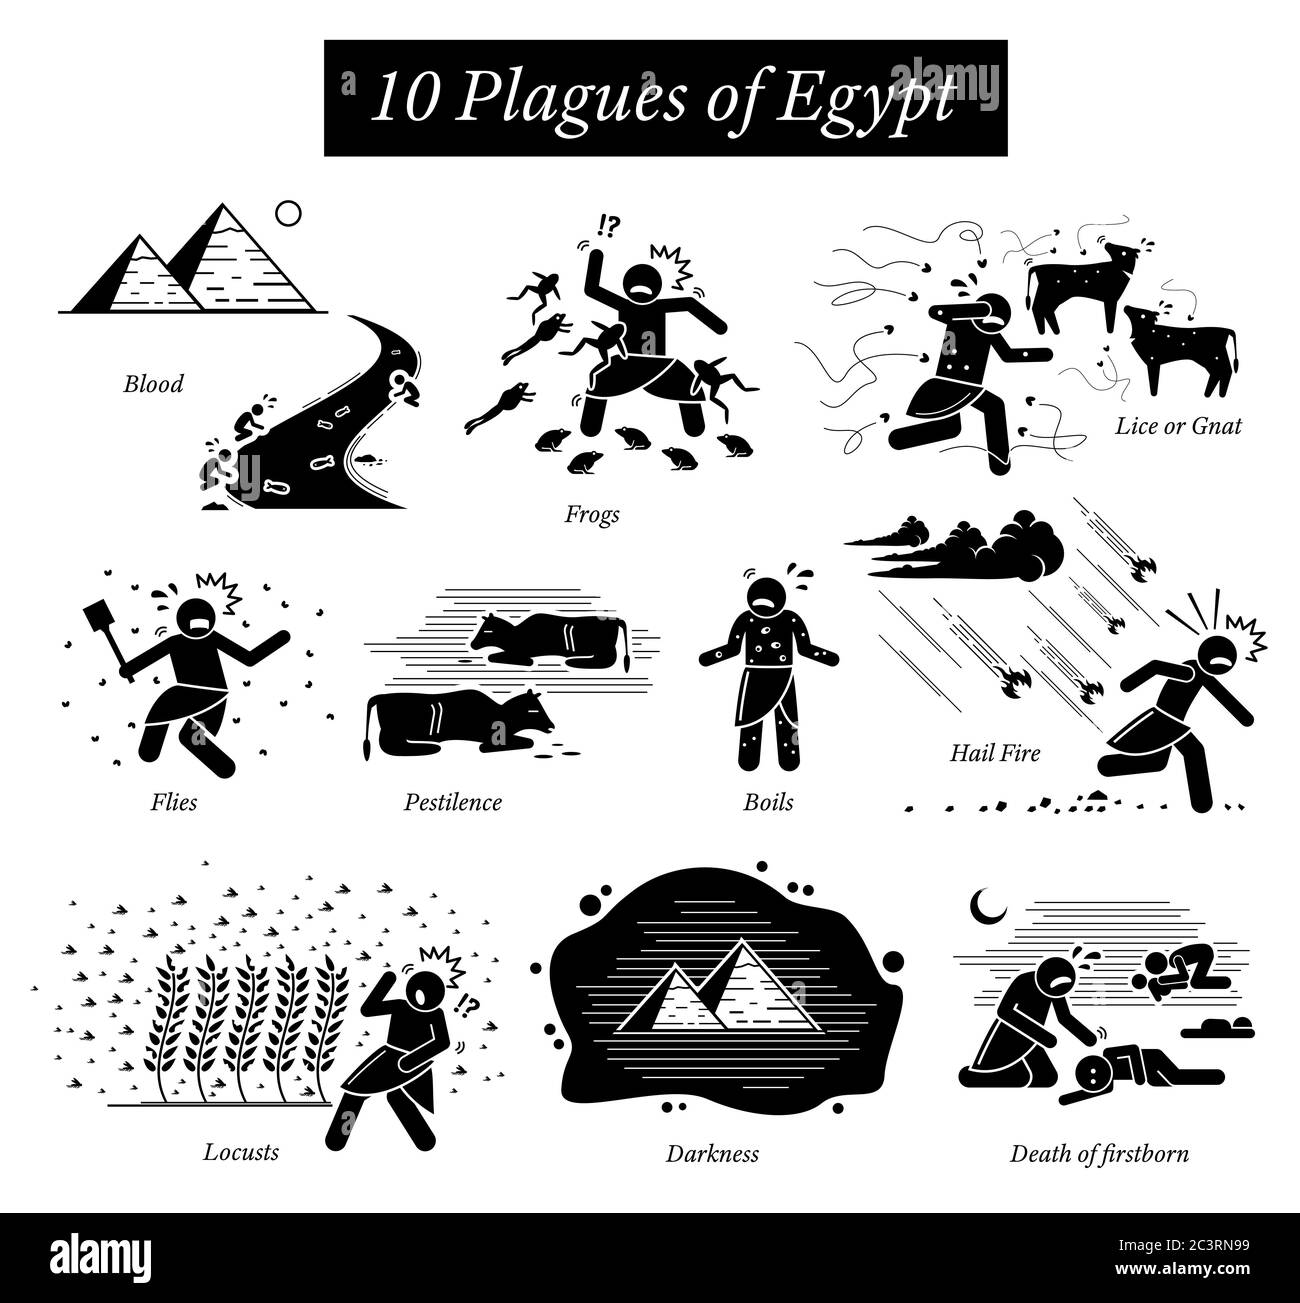 The Ten Plagues of Egypt icons and pictogram. Moses God punishments are river blood, frogs, lice or gnat, flies, pestilence, boils hail fire thunderst Stock Vector